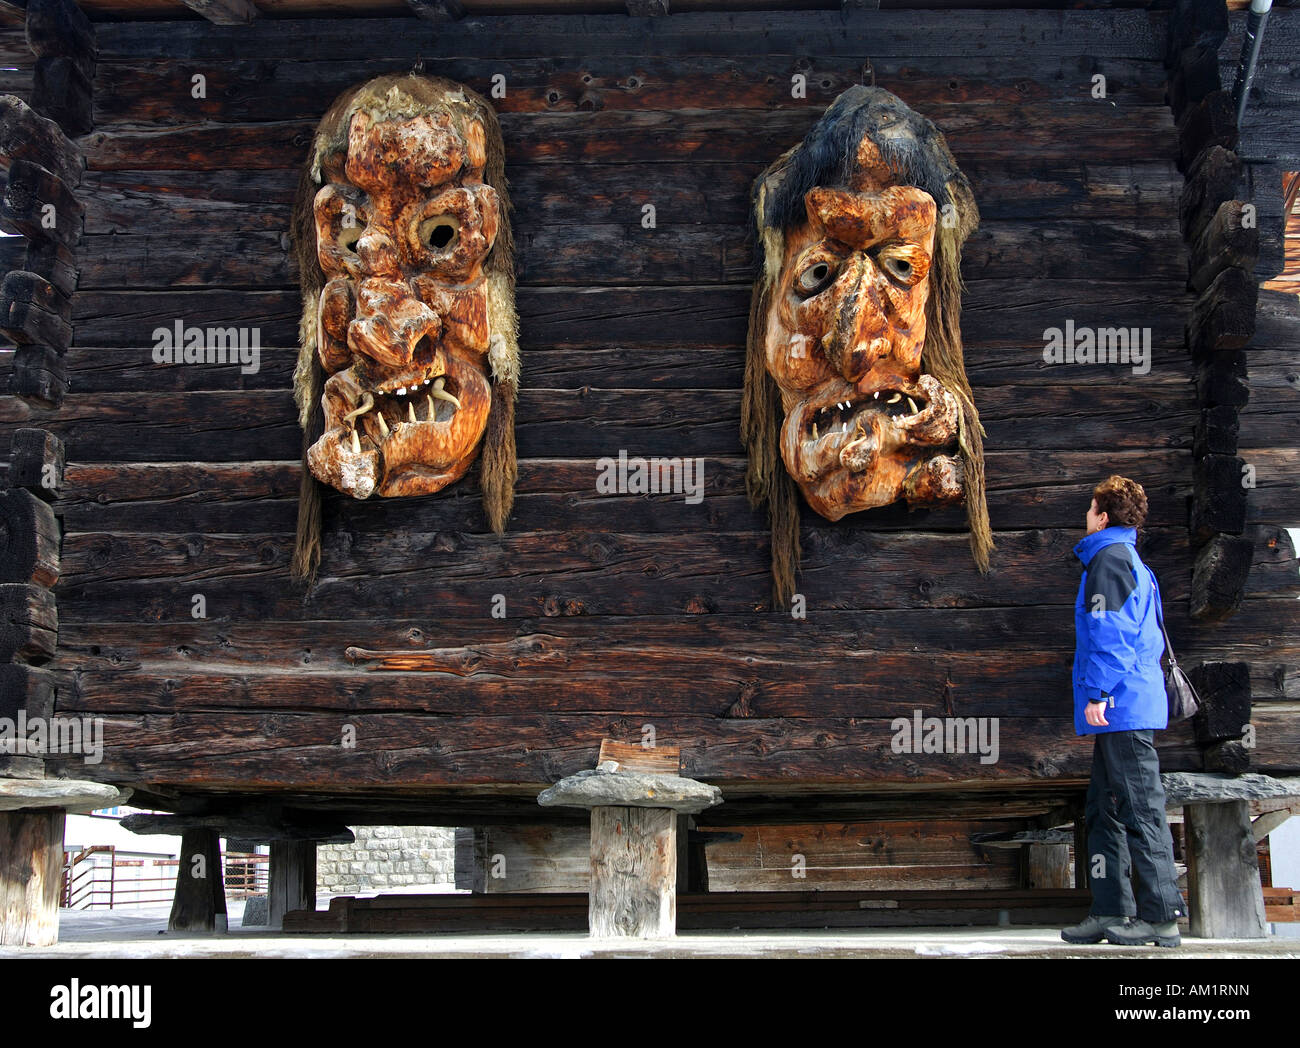 Women looks at a pair of oversized traditional wooden masks made of Swiss pine wood, Wiler, Loetschental, Valais, Switzerland Stock Photo